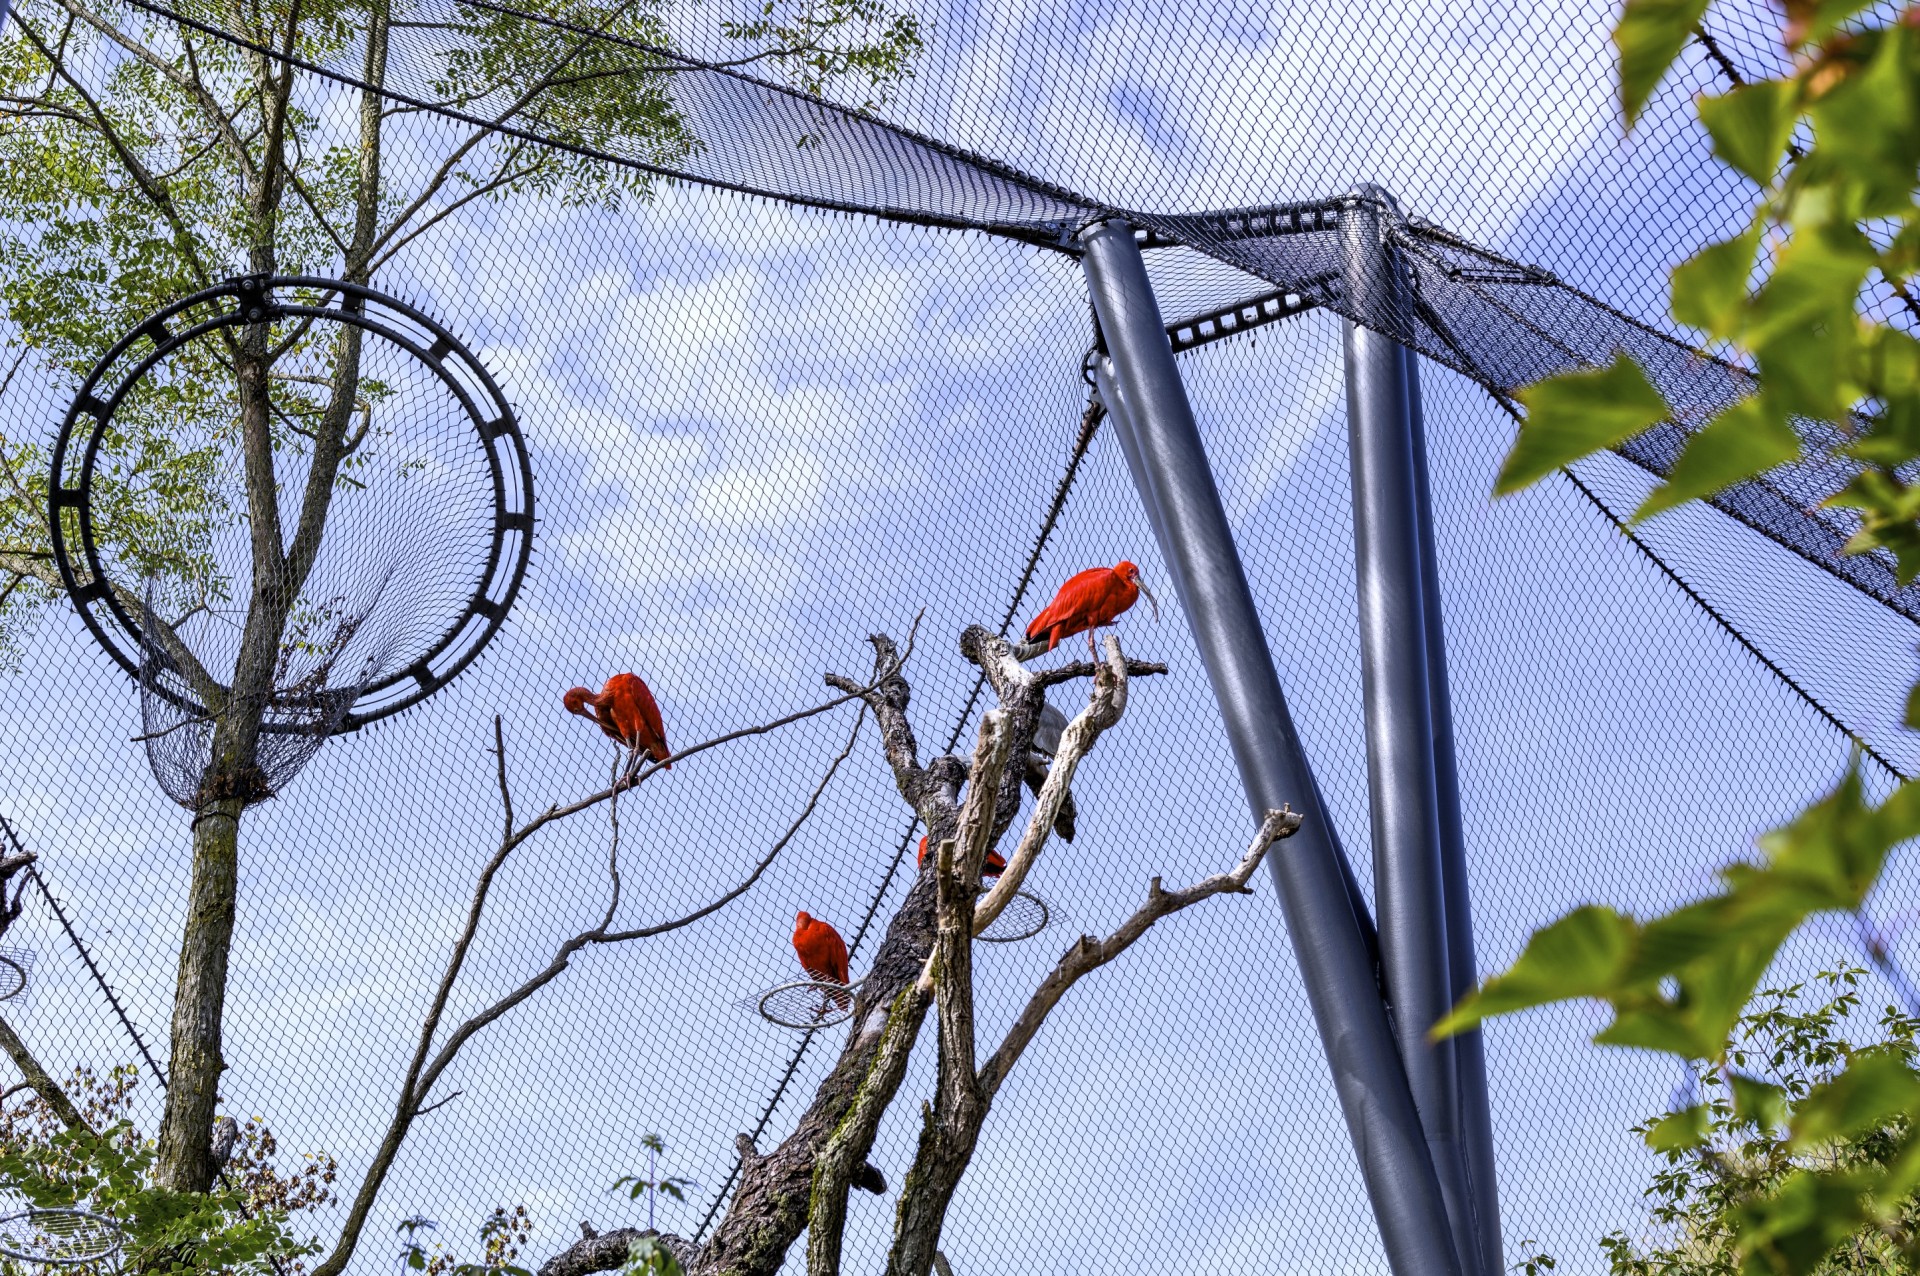 Red birds in animal enclosure made of stainless steel